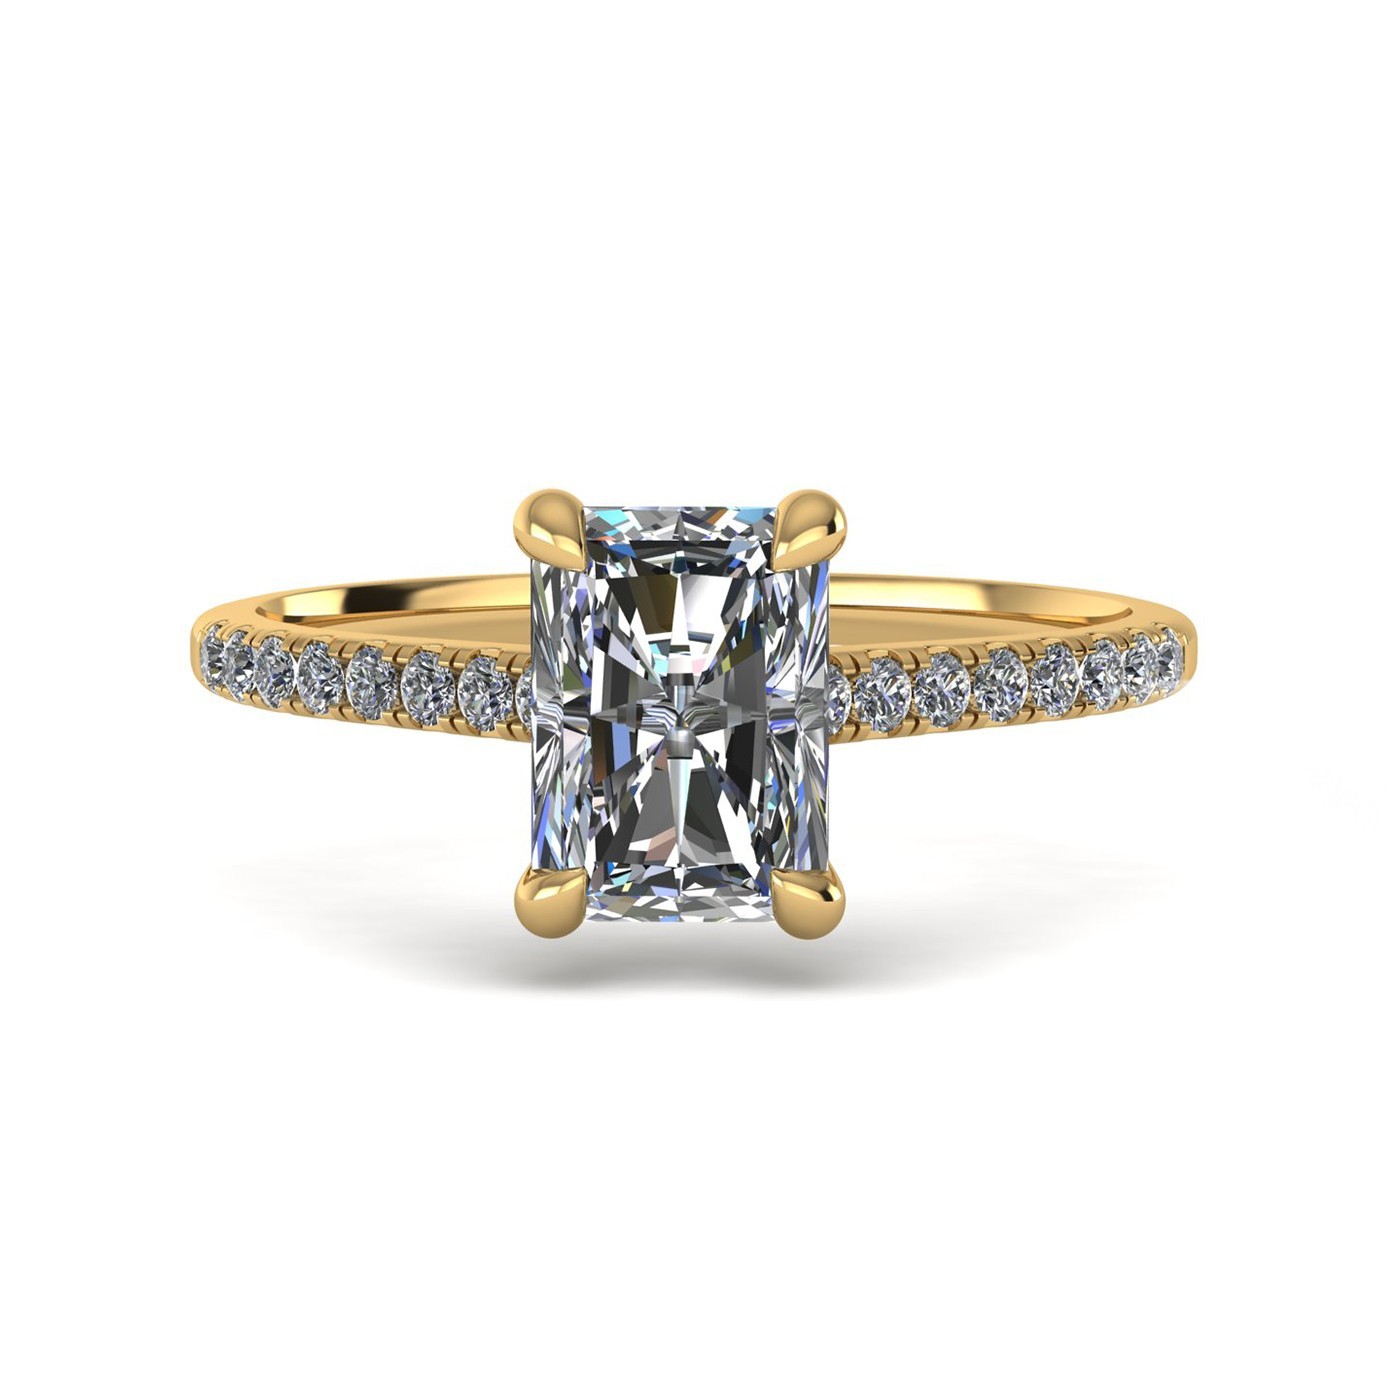 18k yellow gold  1,20 ct 4 prongs radiant cut diamond engagement ring with whisper thin pavÉ set band Photos & images